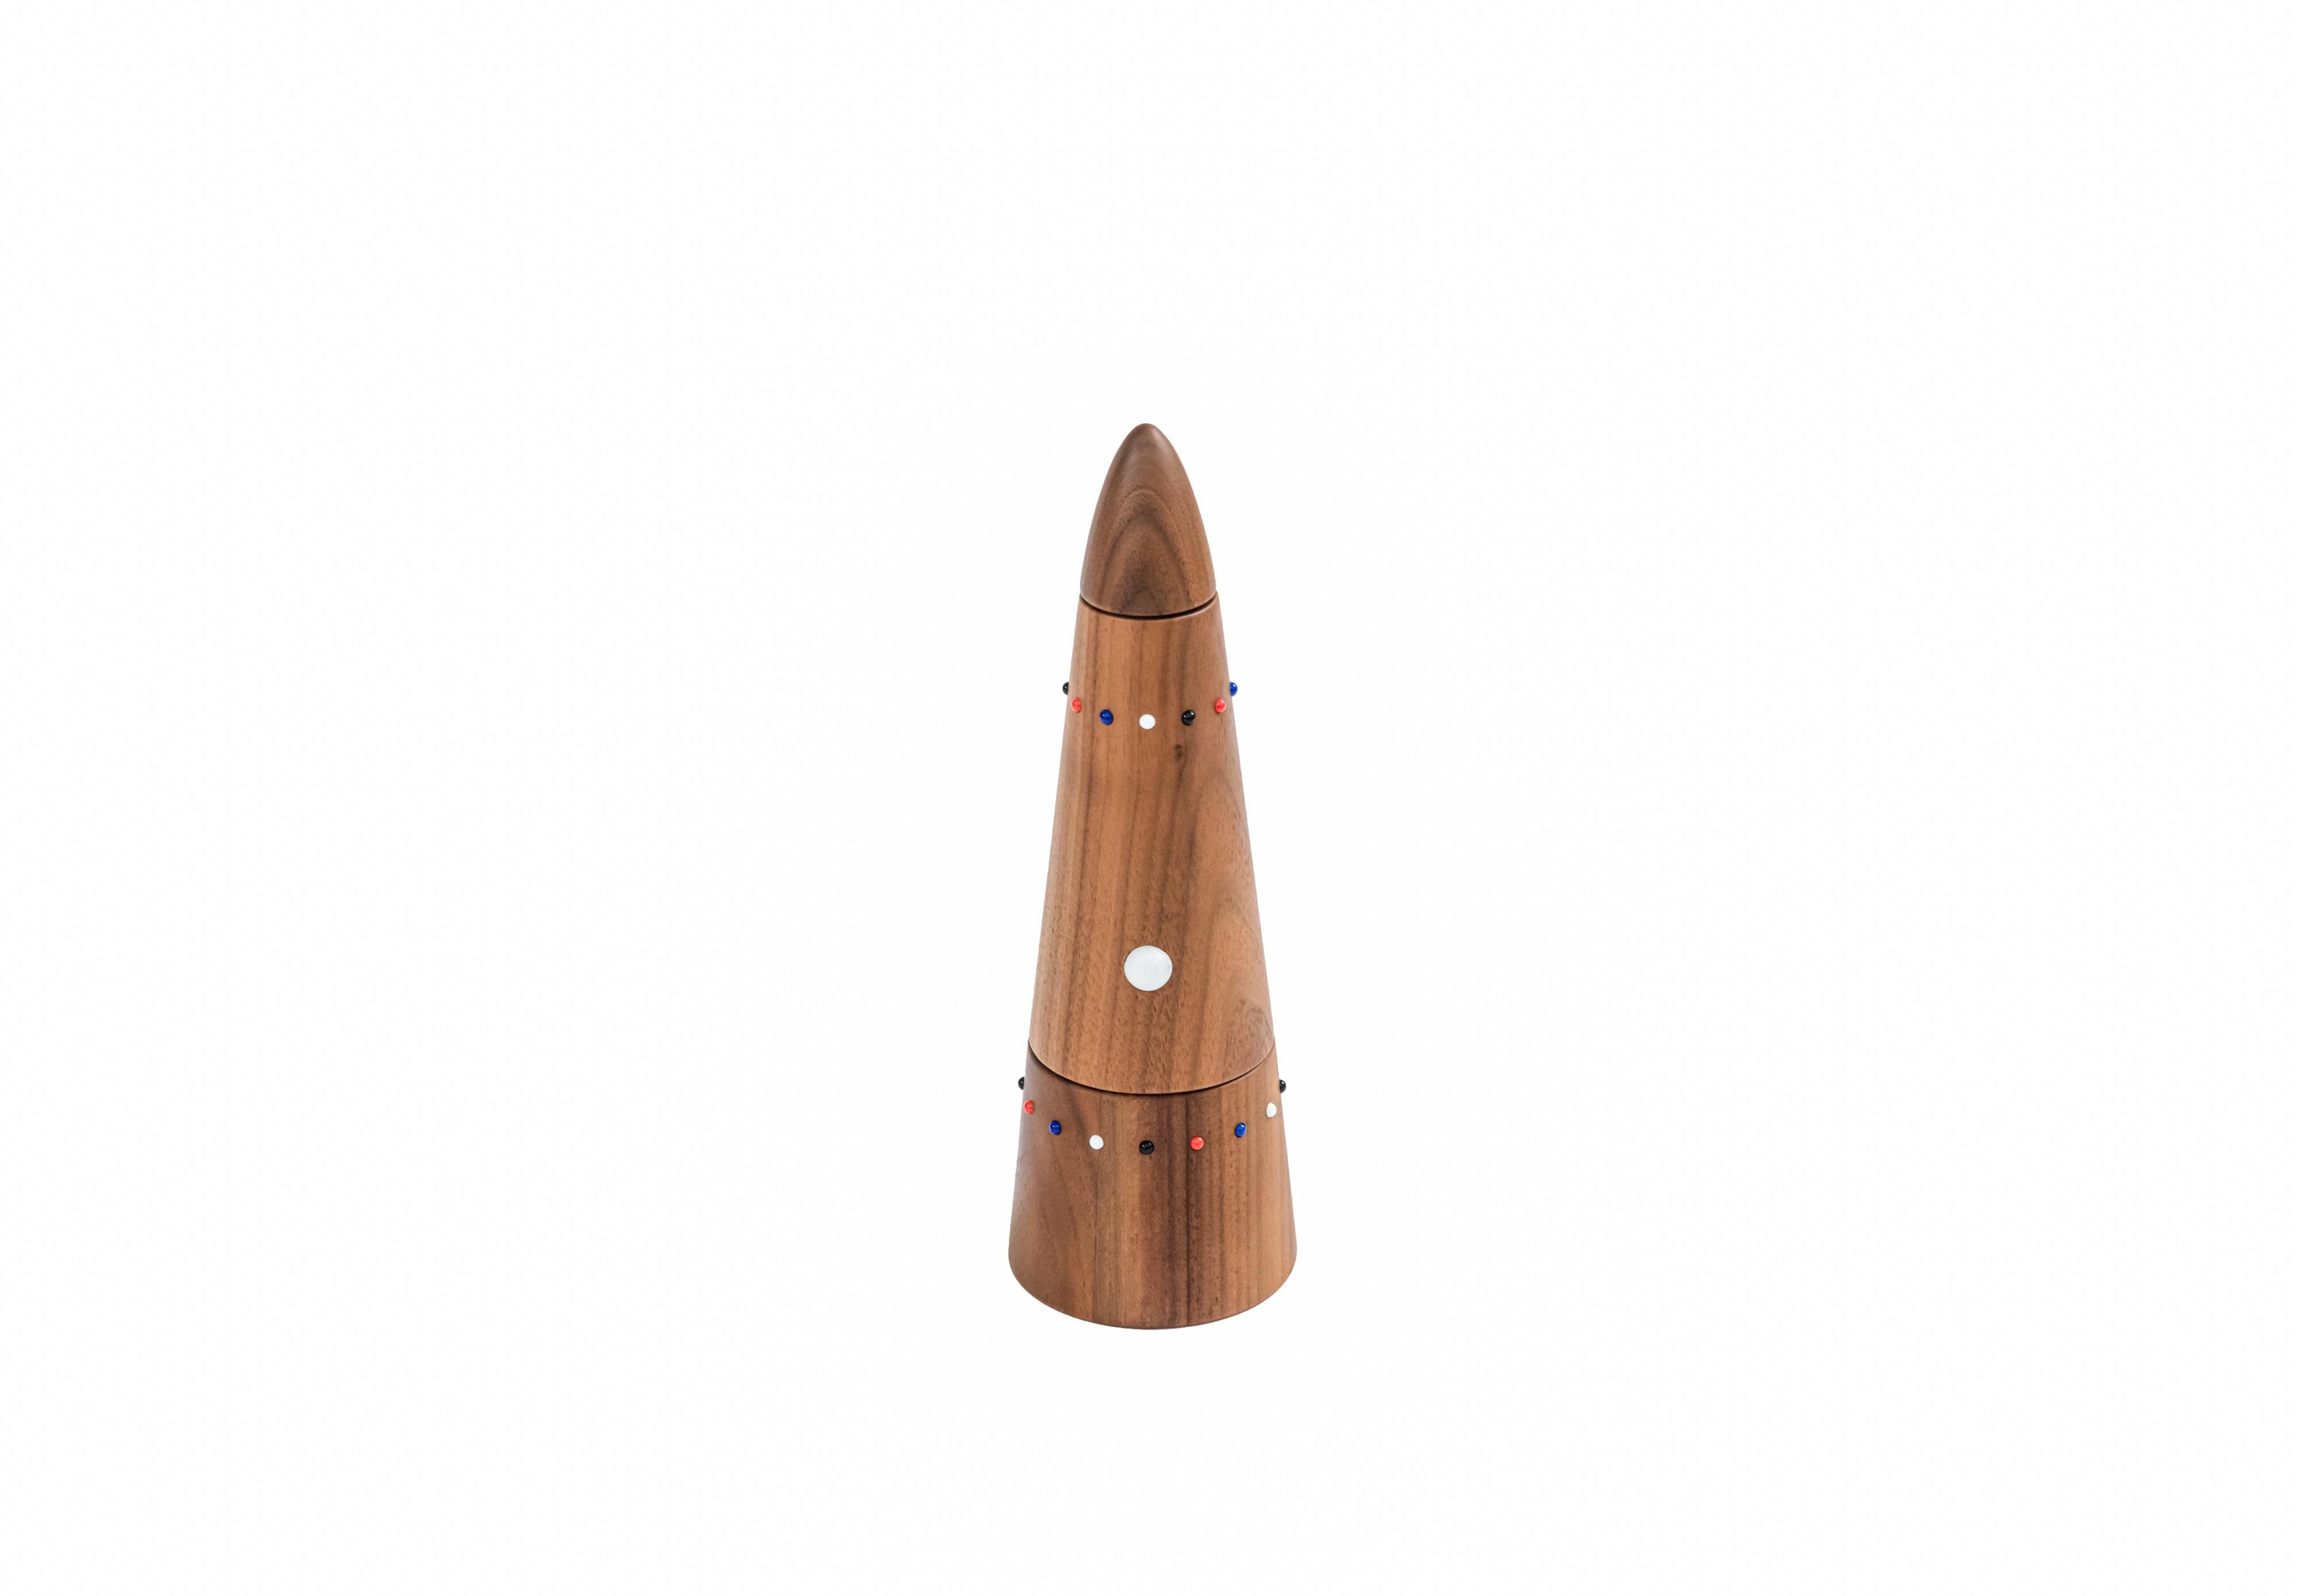 Kenyan Salt mill and pepper grinder set in walnut wood from the SoShiro Pok collection For Sale